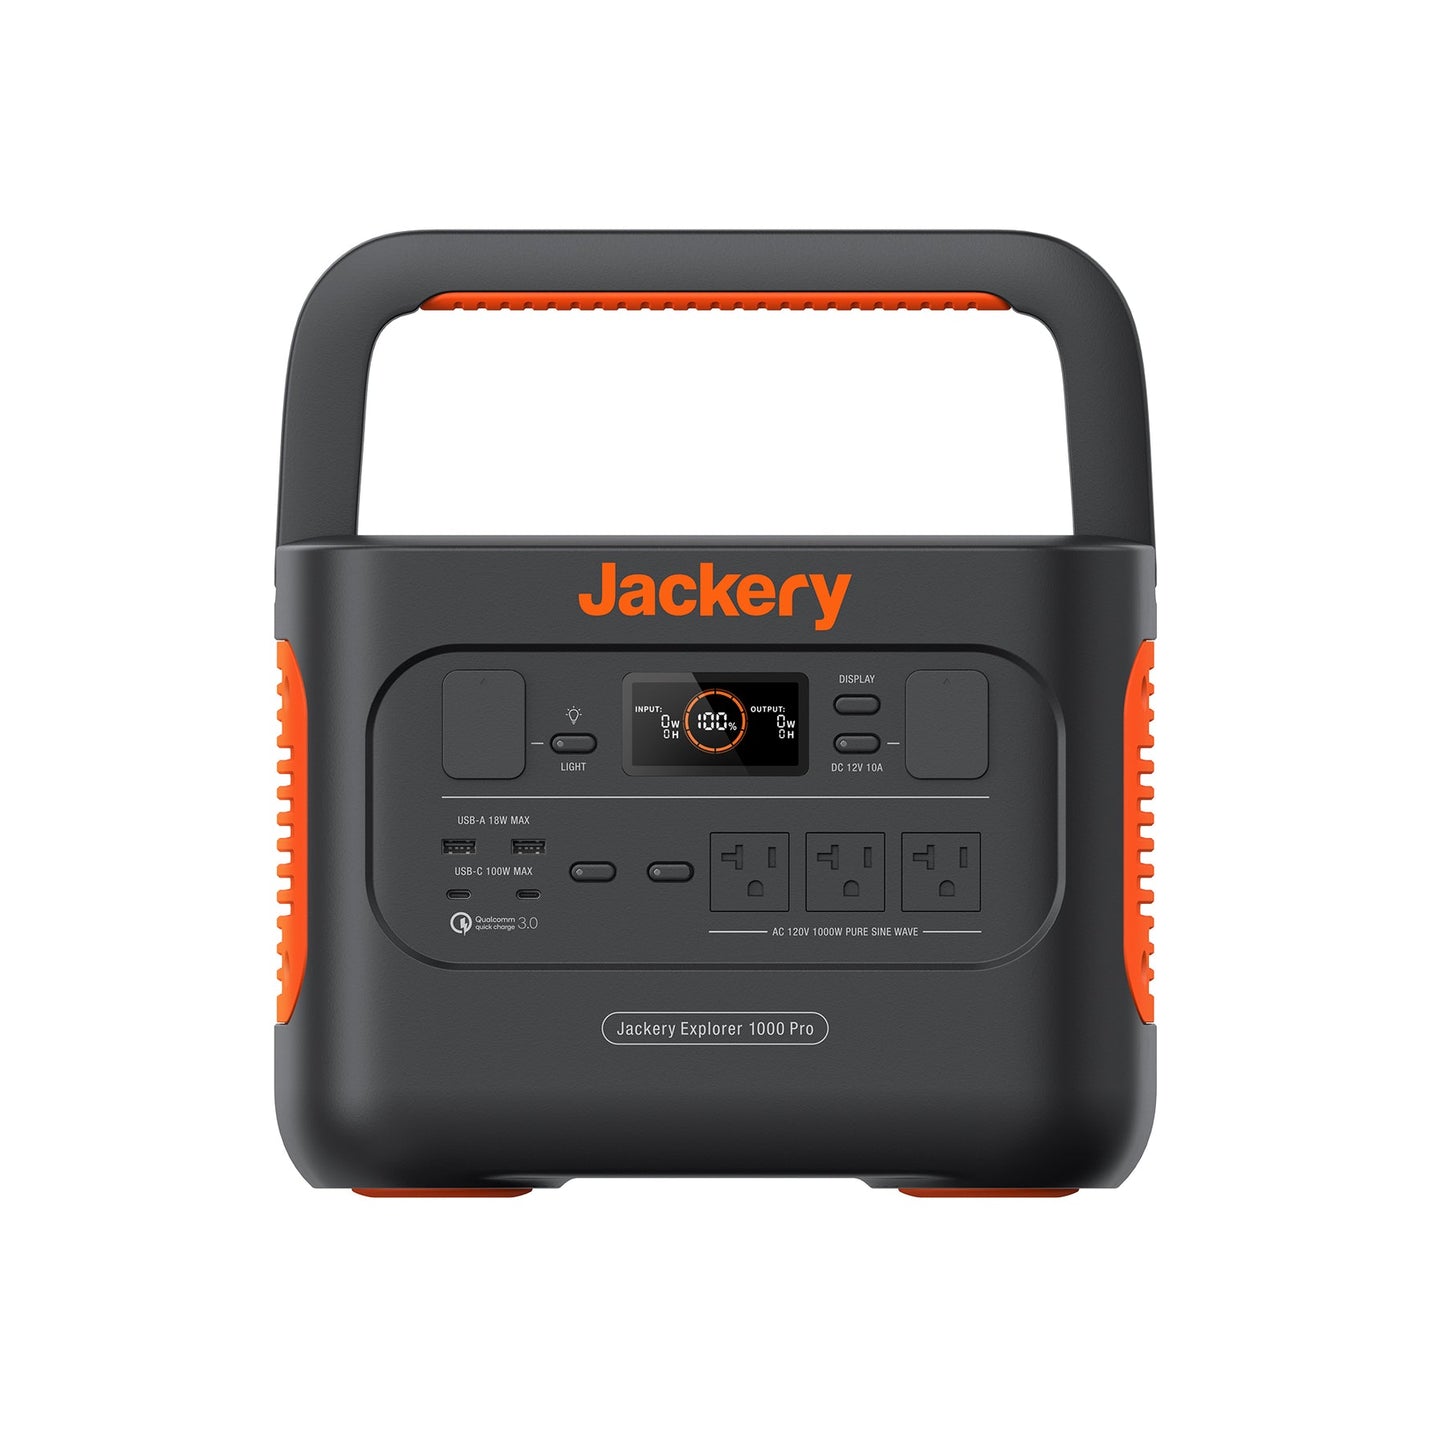 Jackery Explorer 1000 Pro Portable Power Station - 2x100W PD Ports & 800W Input, 1.8Hrs to Full Charge, for Outdoor RV, Camping, Emergencies